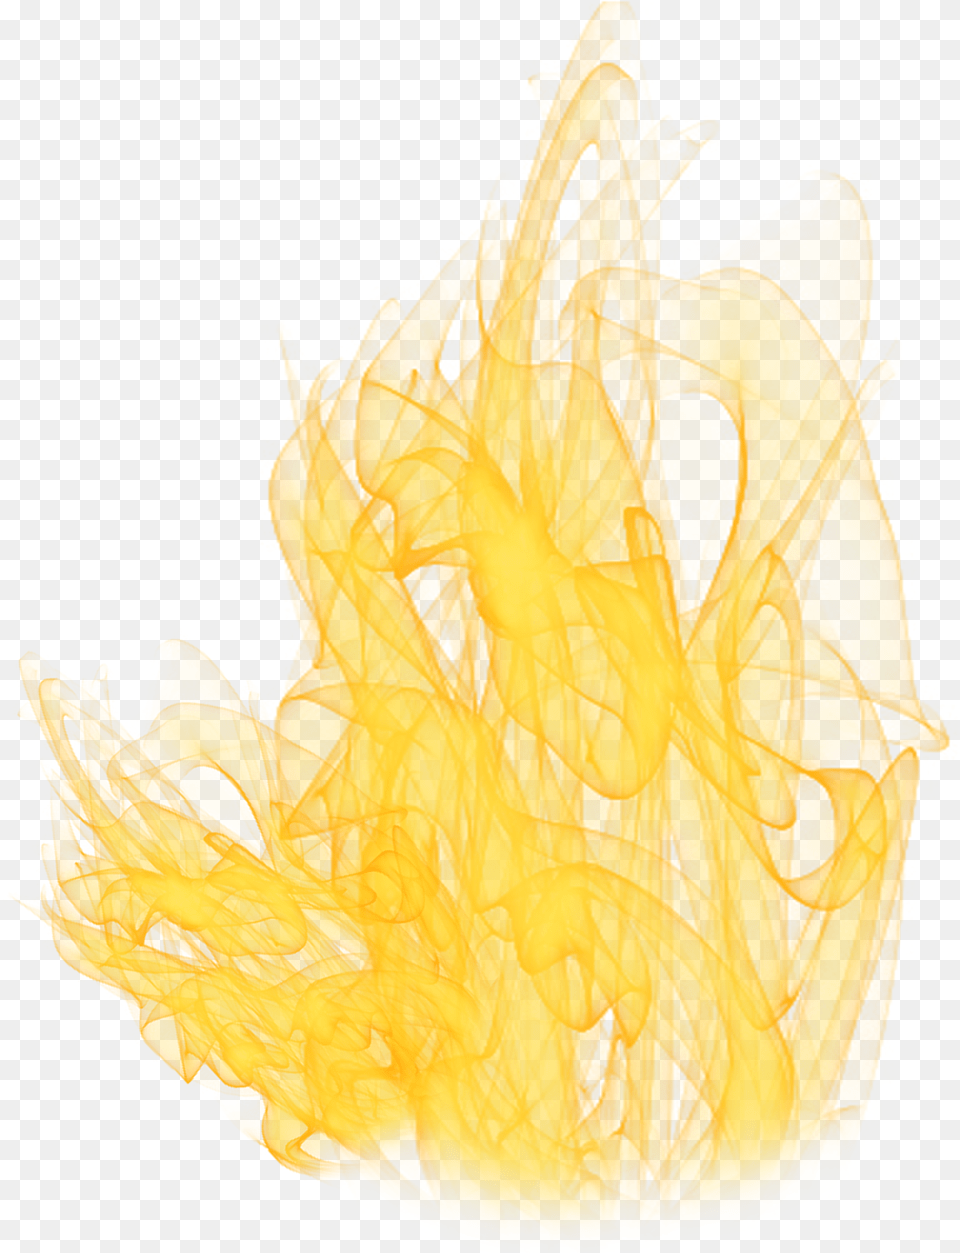 Ftestickers Fire Flames Transparent Yellow Golden Flame Png Image